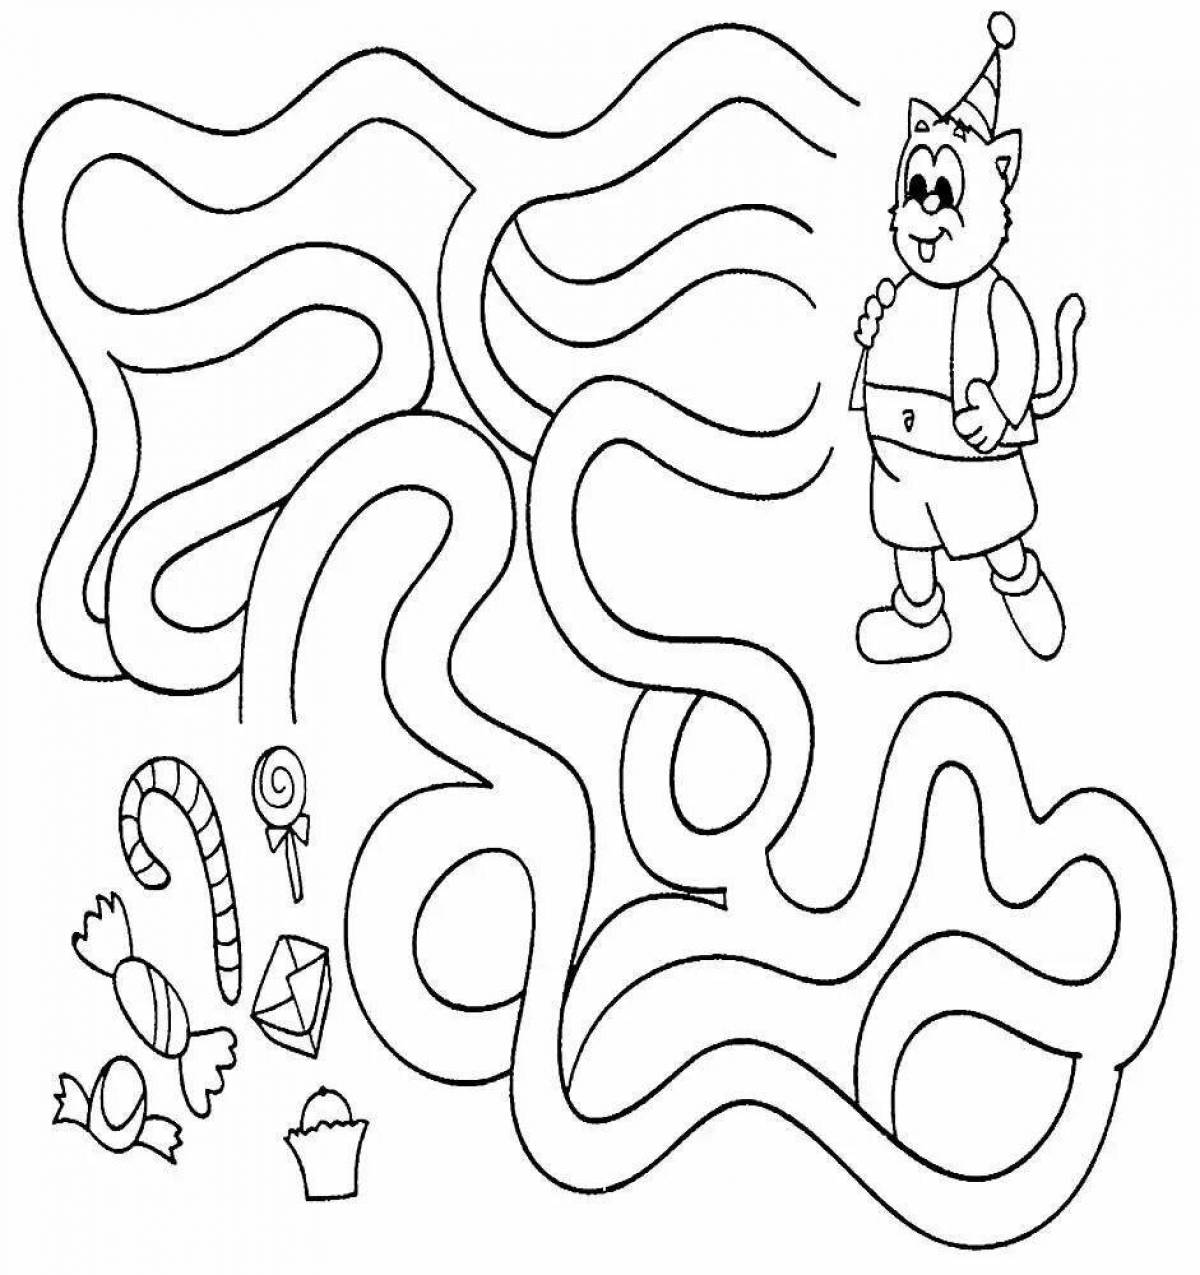 Fun coloring maze for children 4 years old